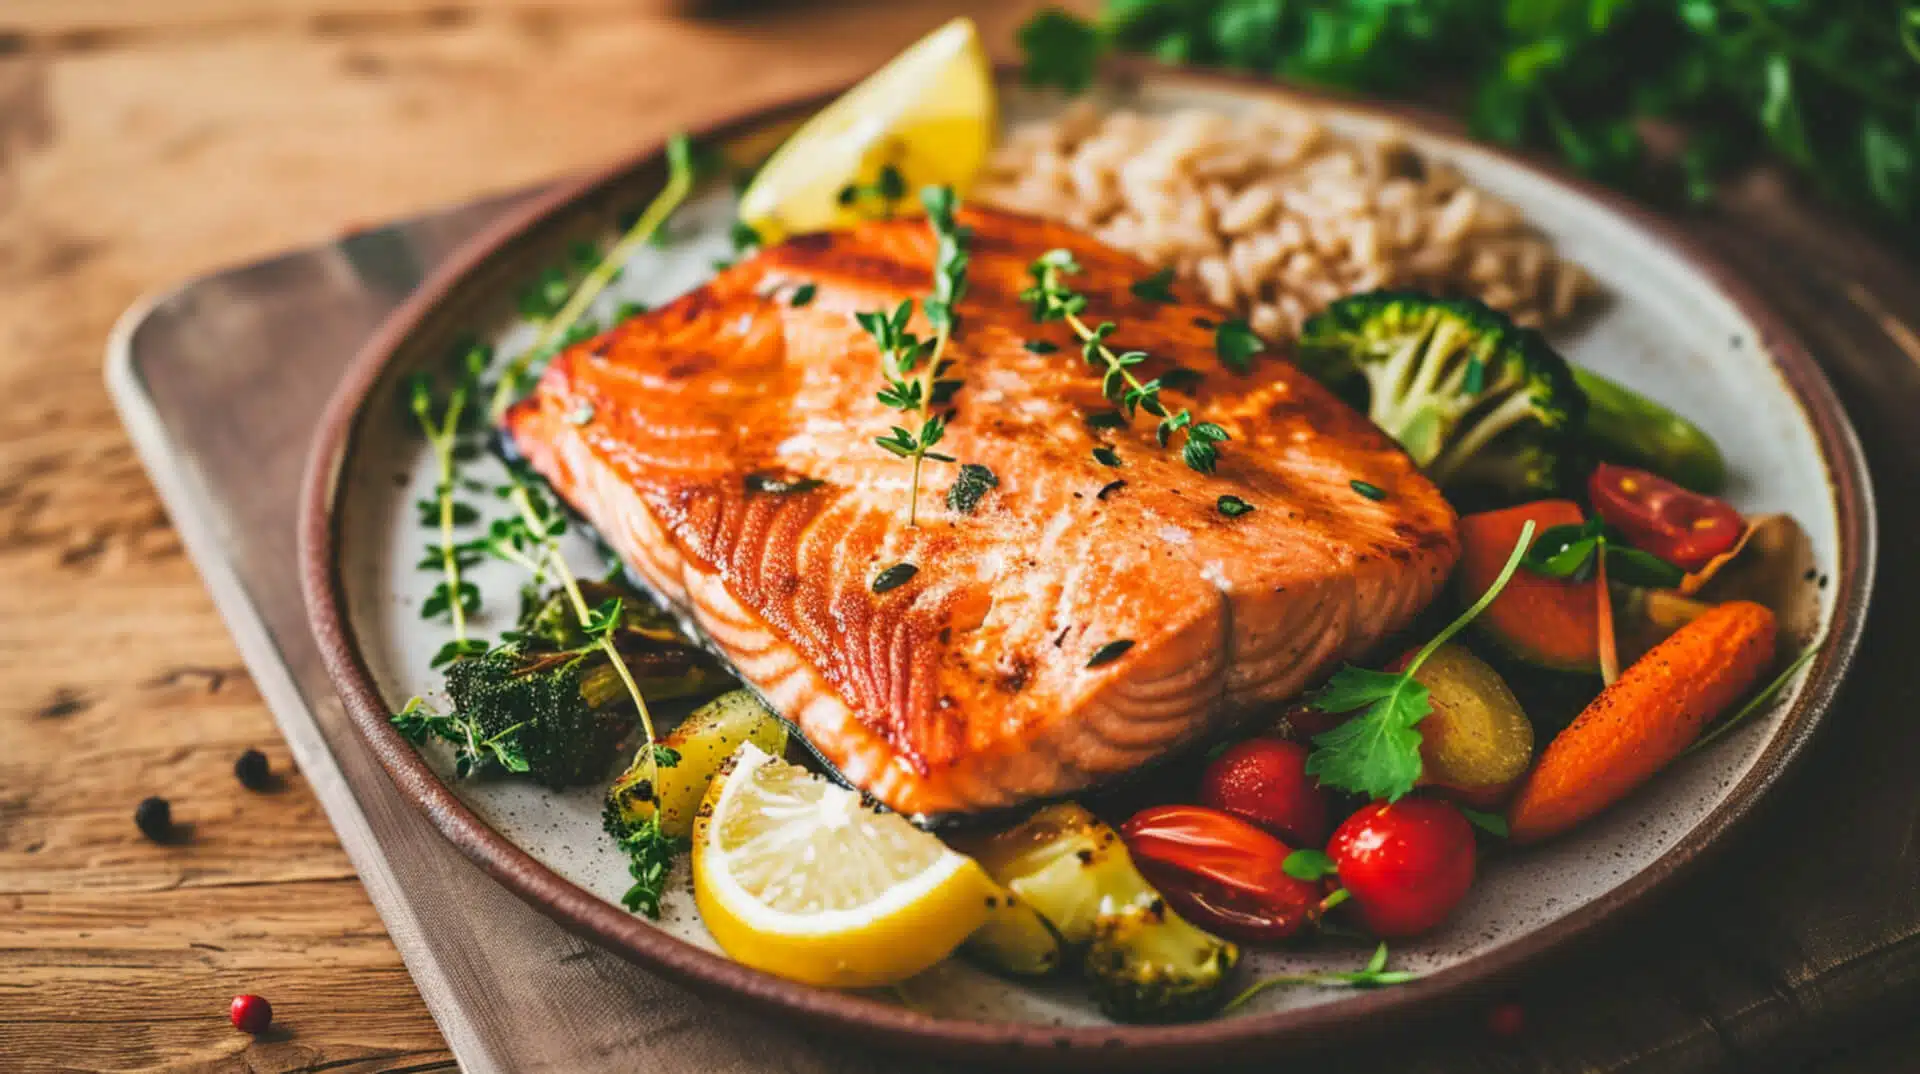 Healthy Fish Recipies From Around The World - Frozen Fish Direct